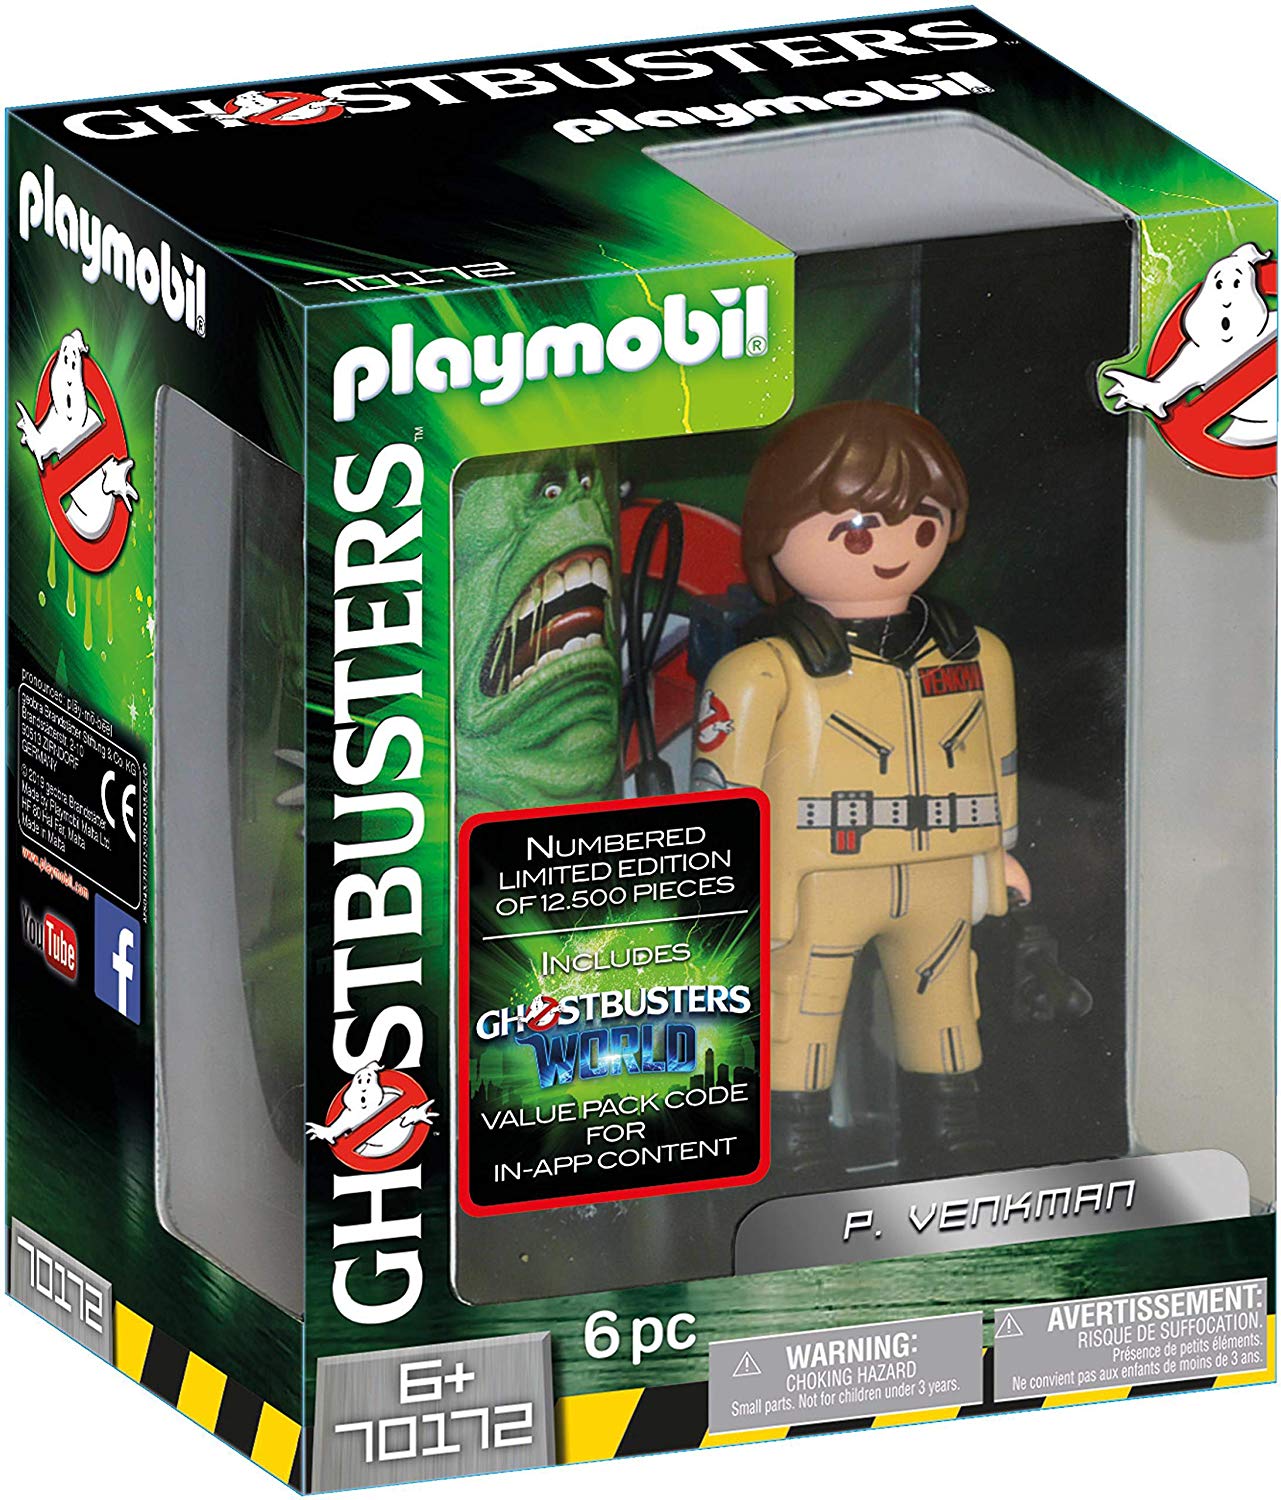 Playmobil 70172 Ghostbusters Collectable Figurine P. Venkman Colourful